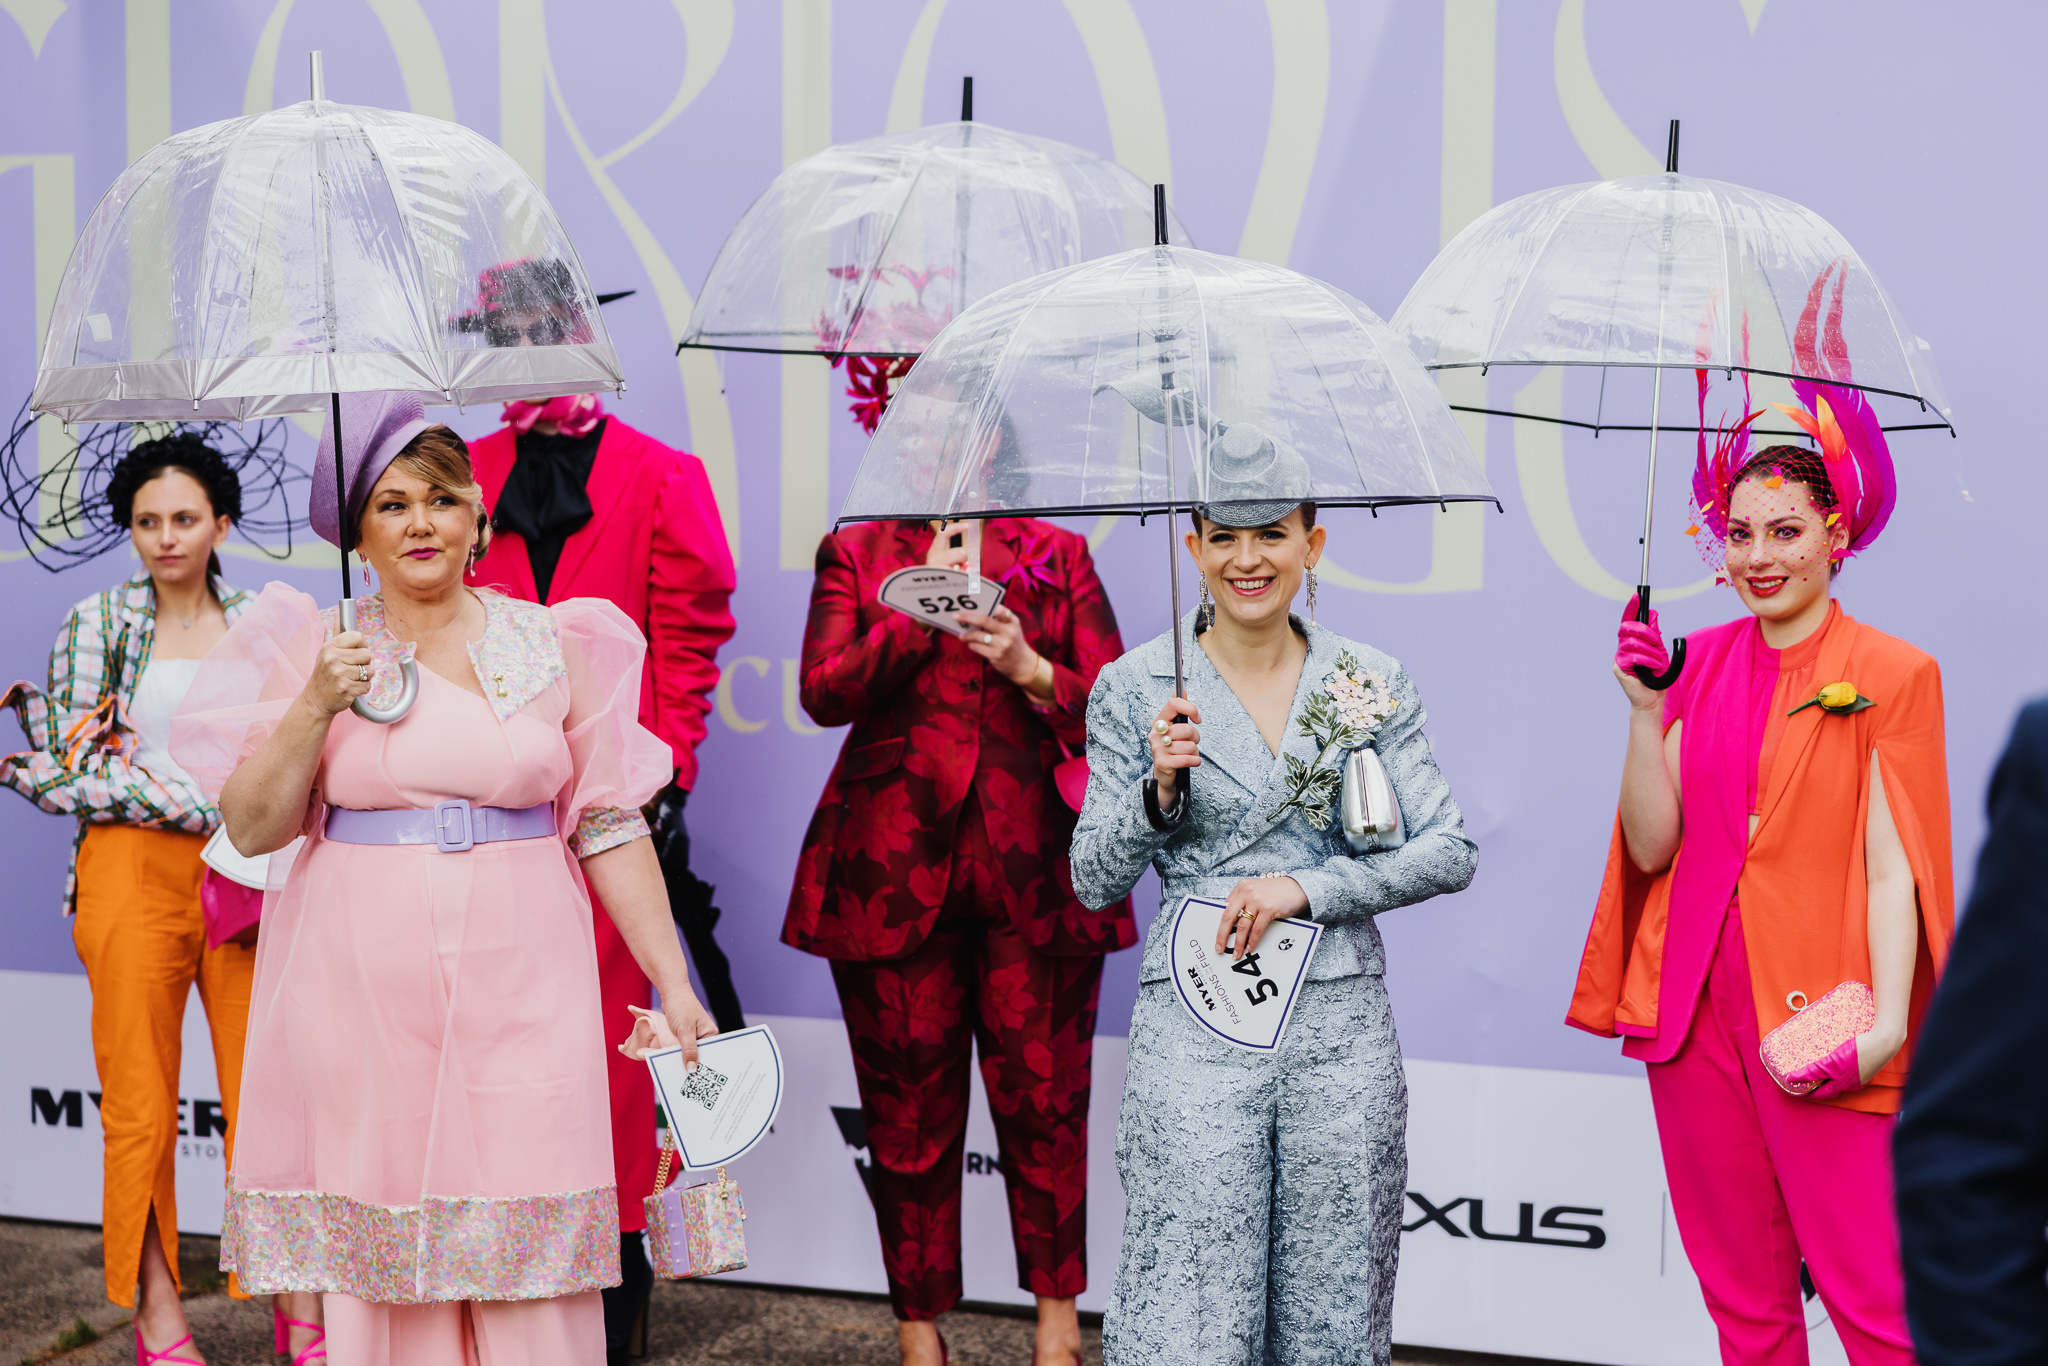 Rain at the Melbourne Cup - Be prepared for rain at the races